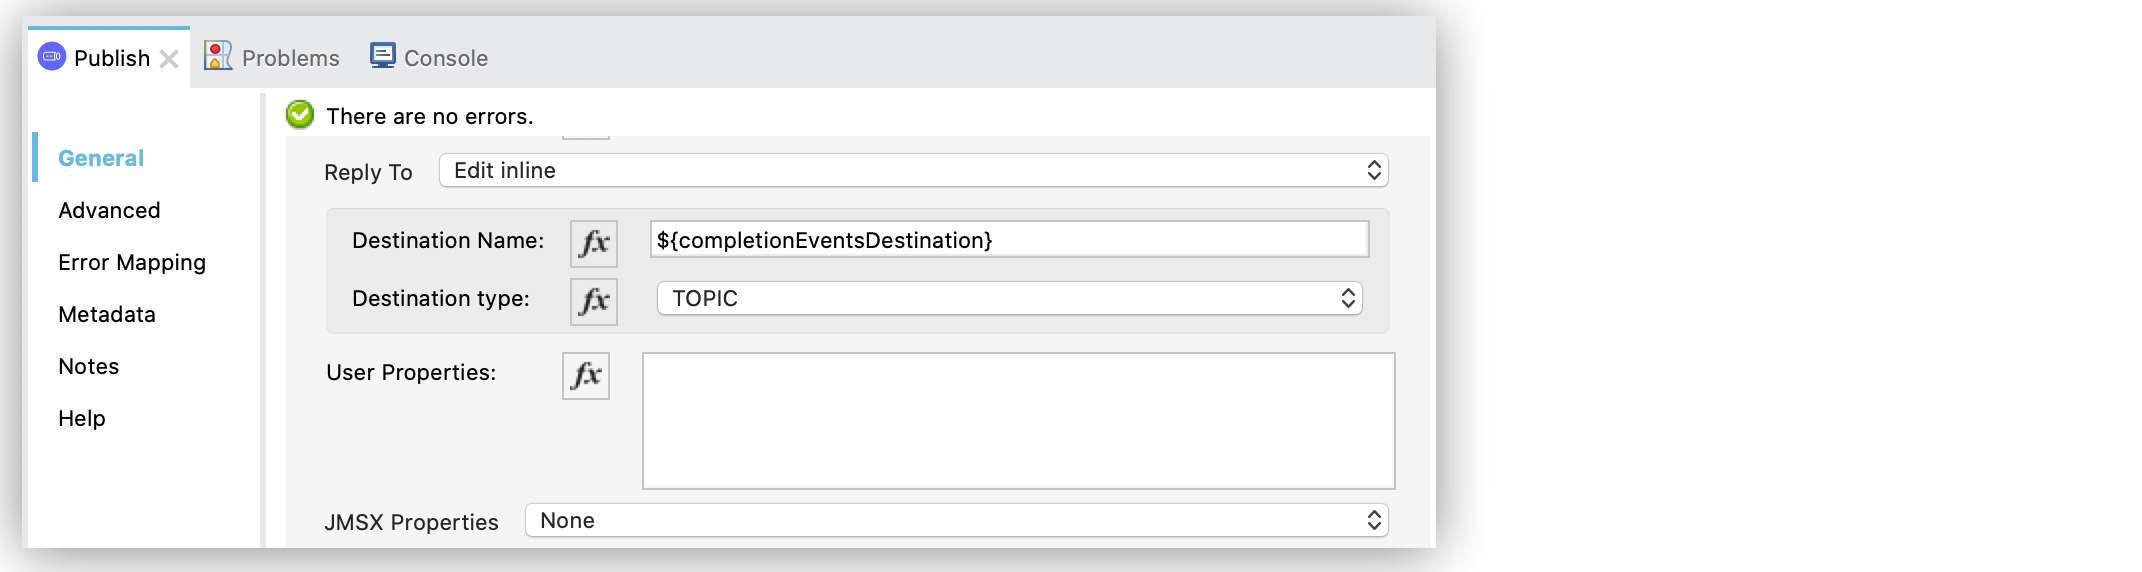 In the Publish configuration screen, set the Reply To to Edit inline, set a name for the Destination name field, and set the Destination type field to TOPIC.